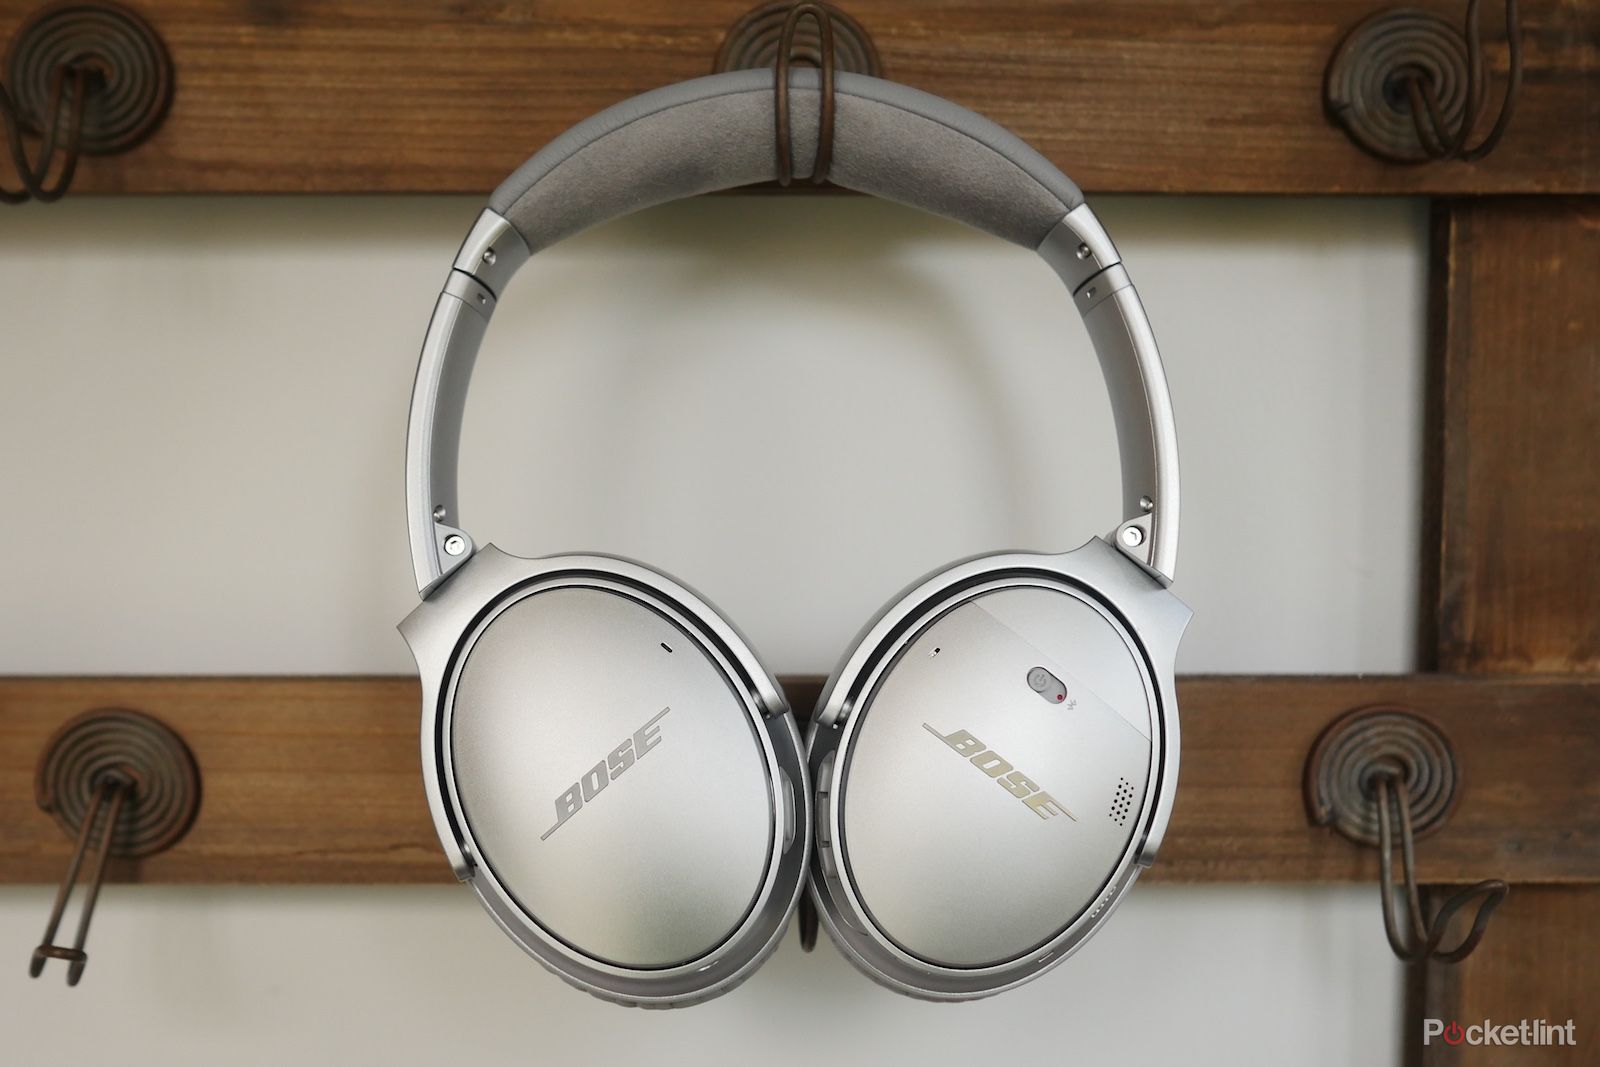 Bose QuietComfort 45 headphones images surface in leaked FCC listing photo 1